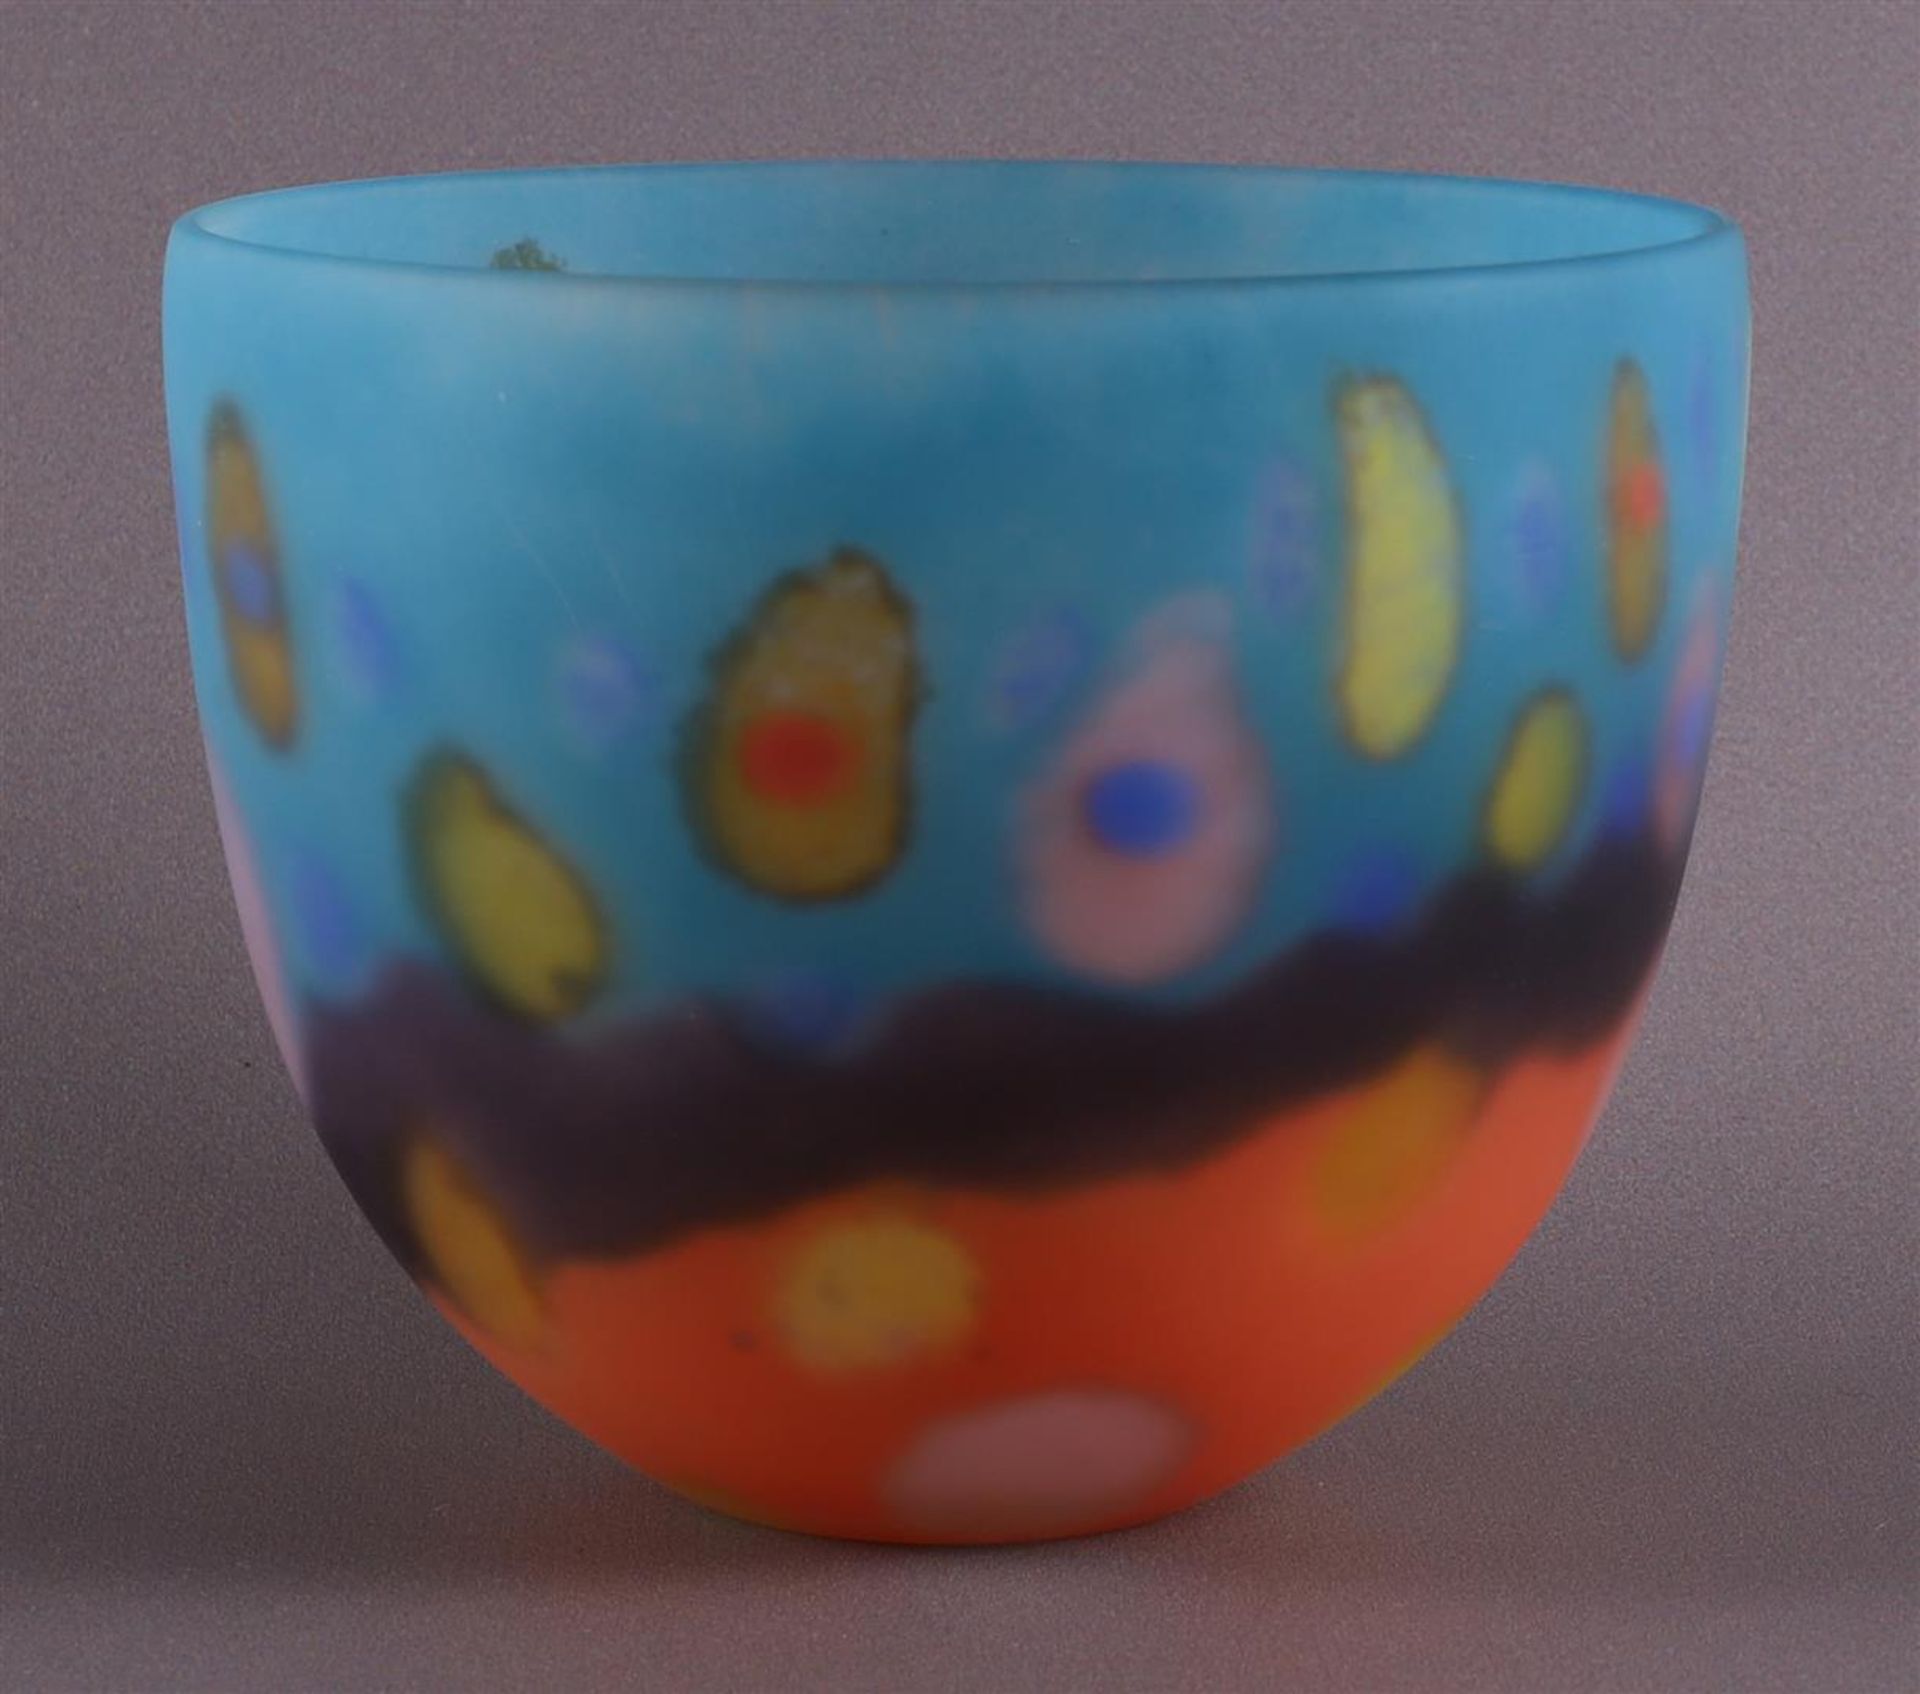 A freely blown polychrome glass vase 'Bowl zone-blue', Pauline Solven. - Image 2 of 8